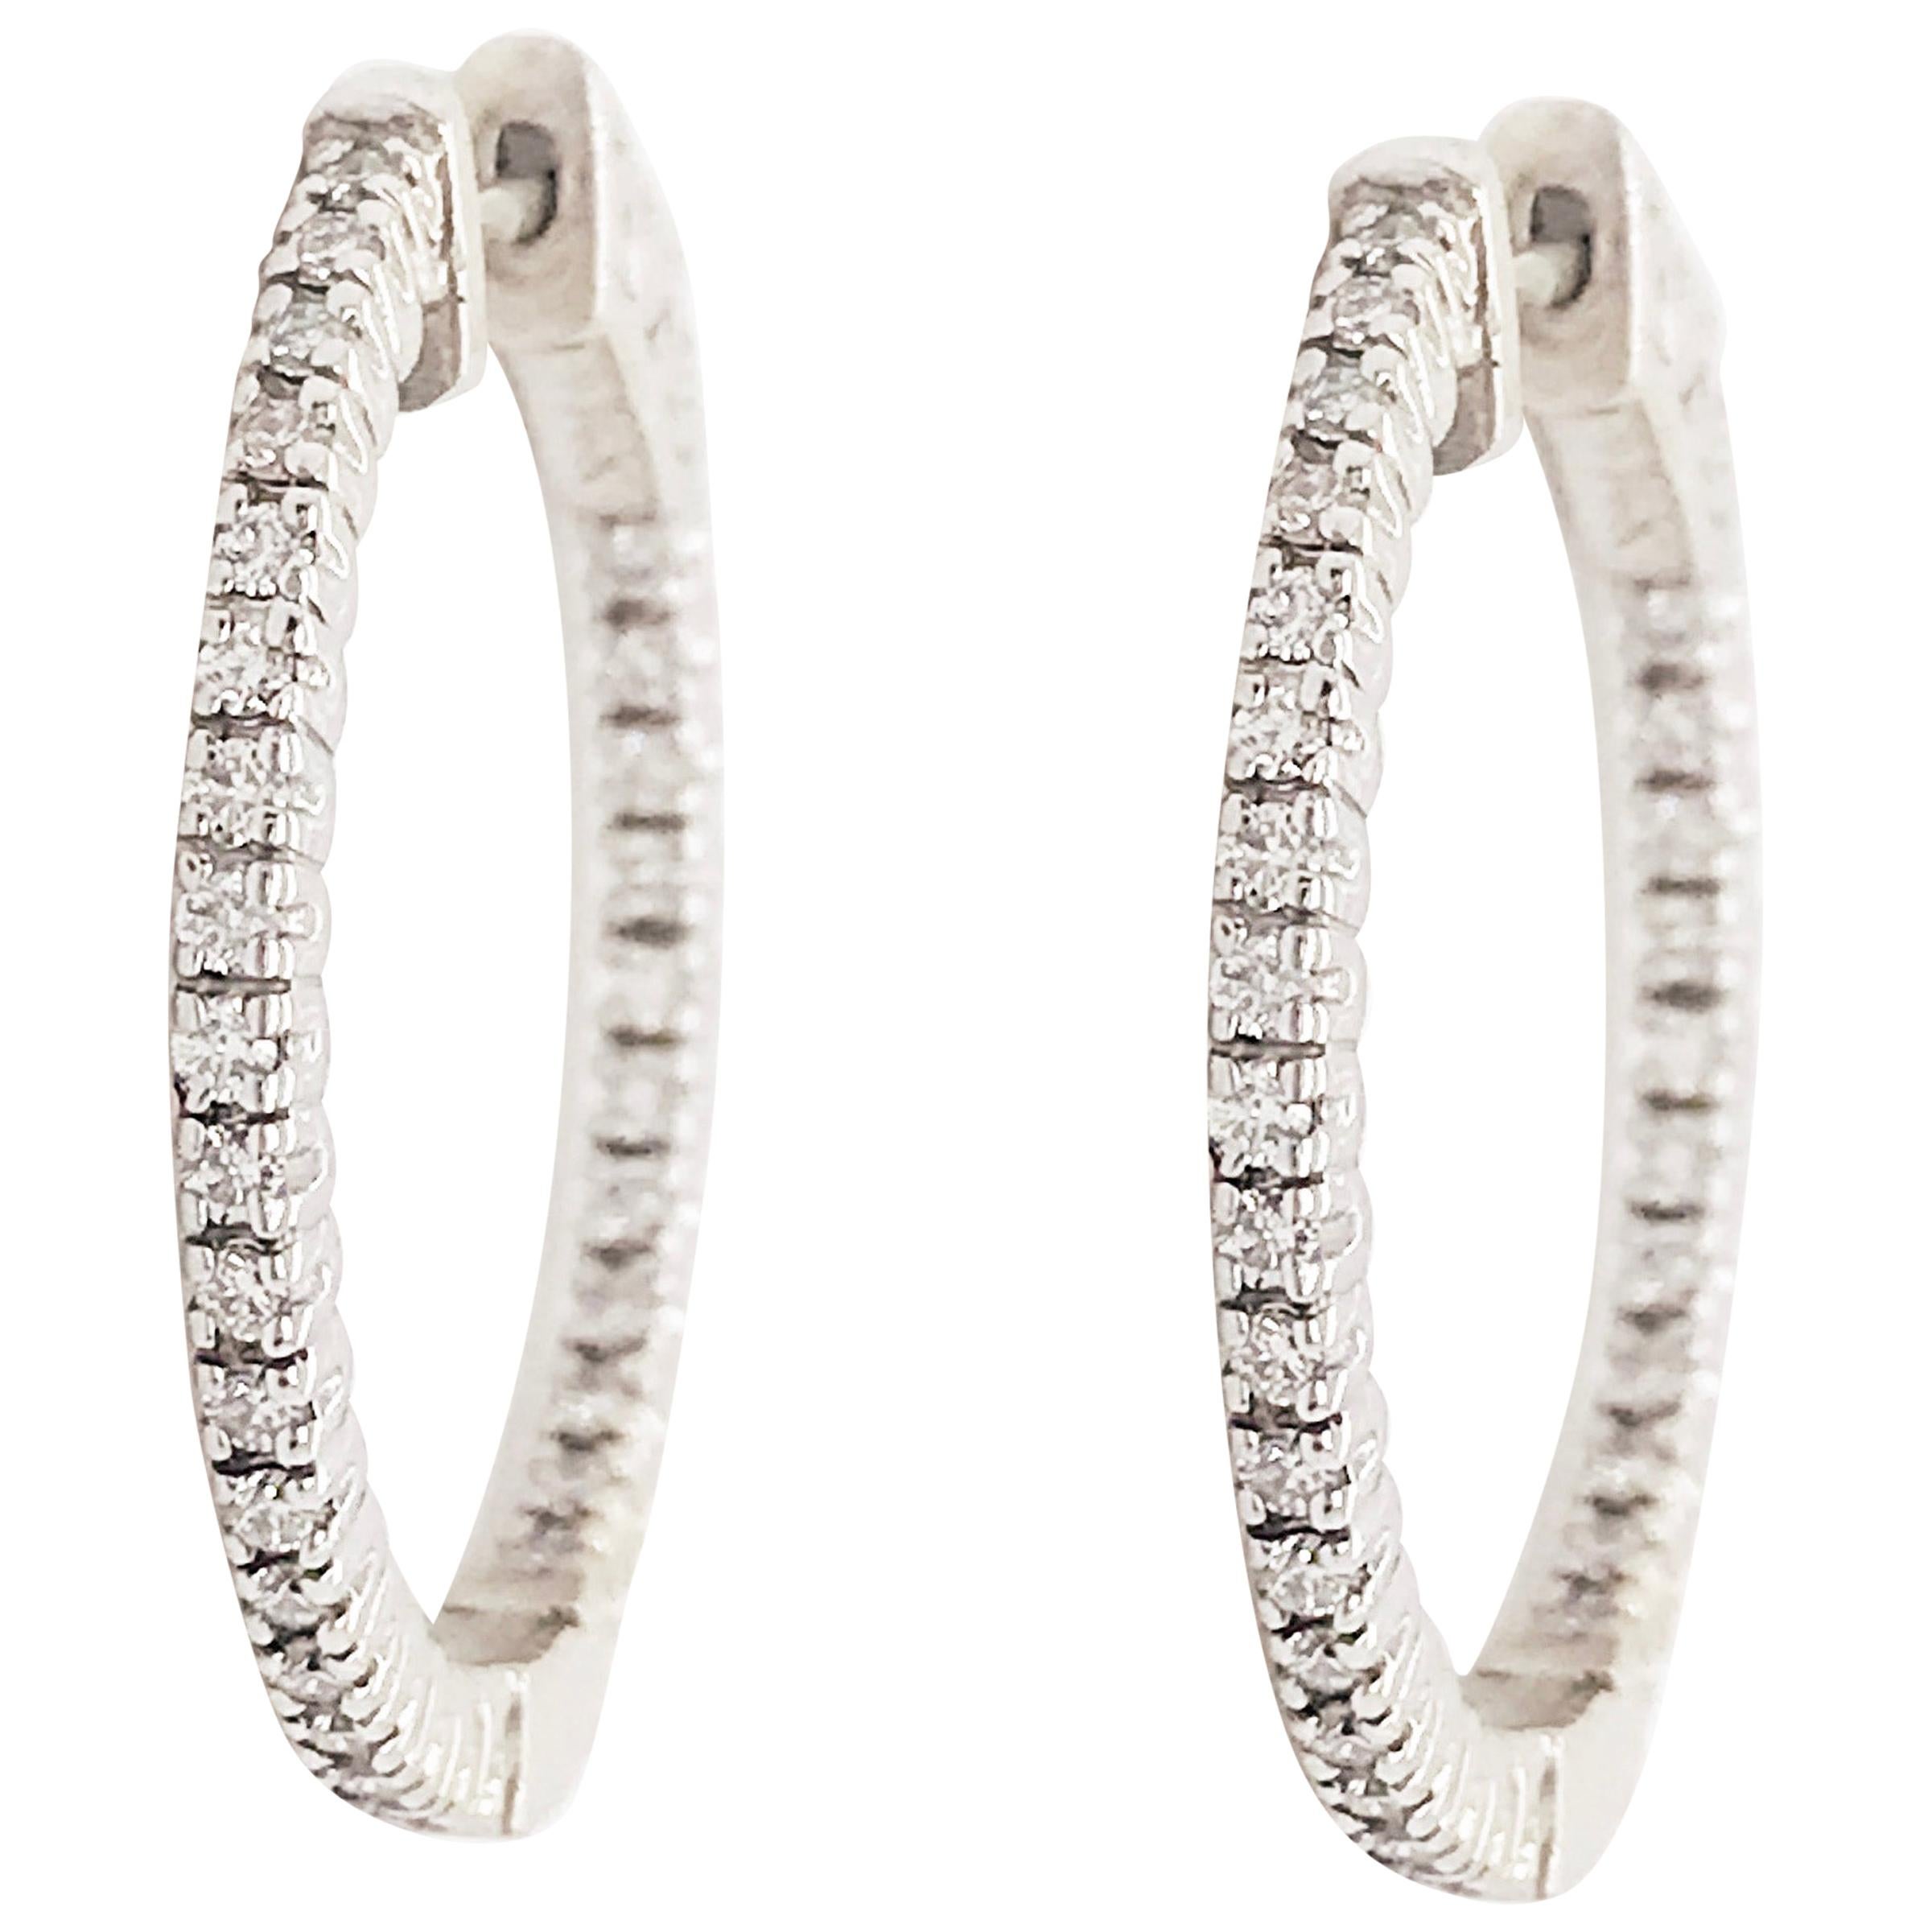 Roberto Coin Small Hoop Earrings With Diamond At Stdibs Roberto Coin